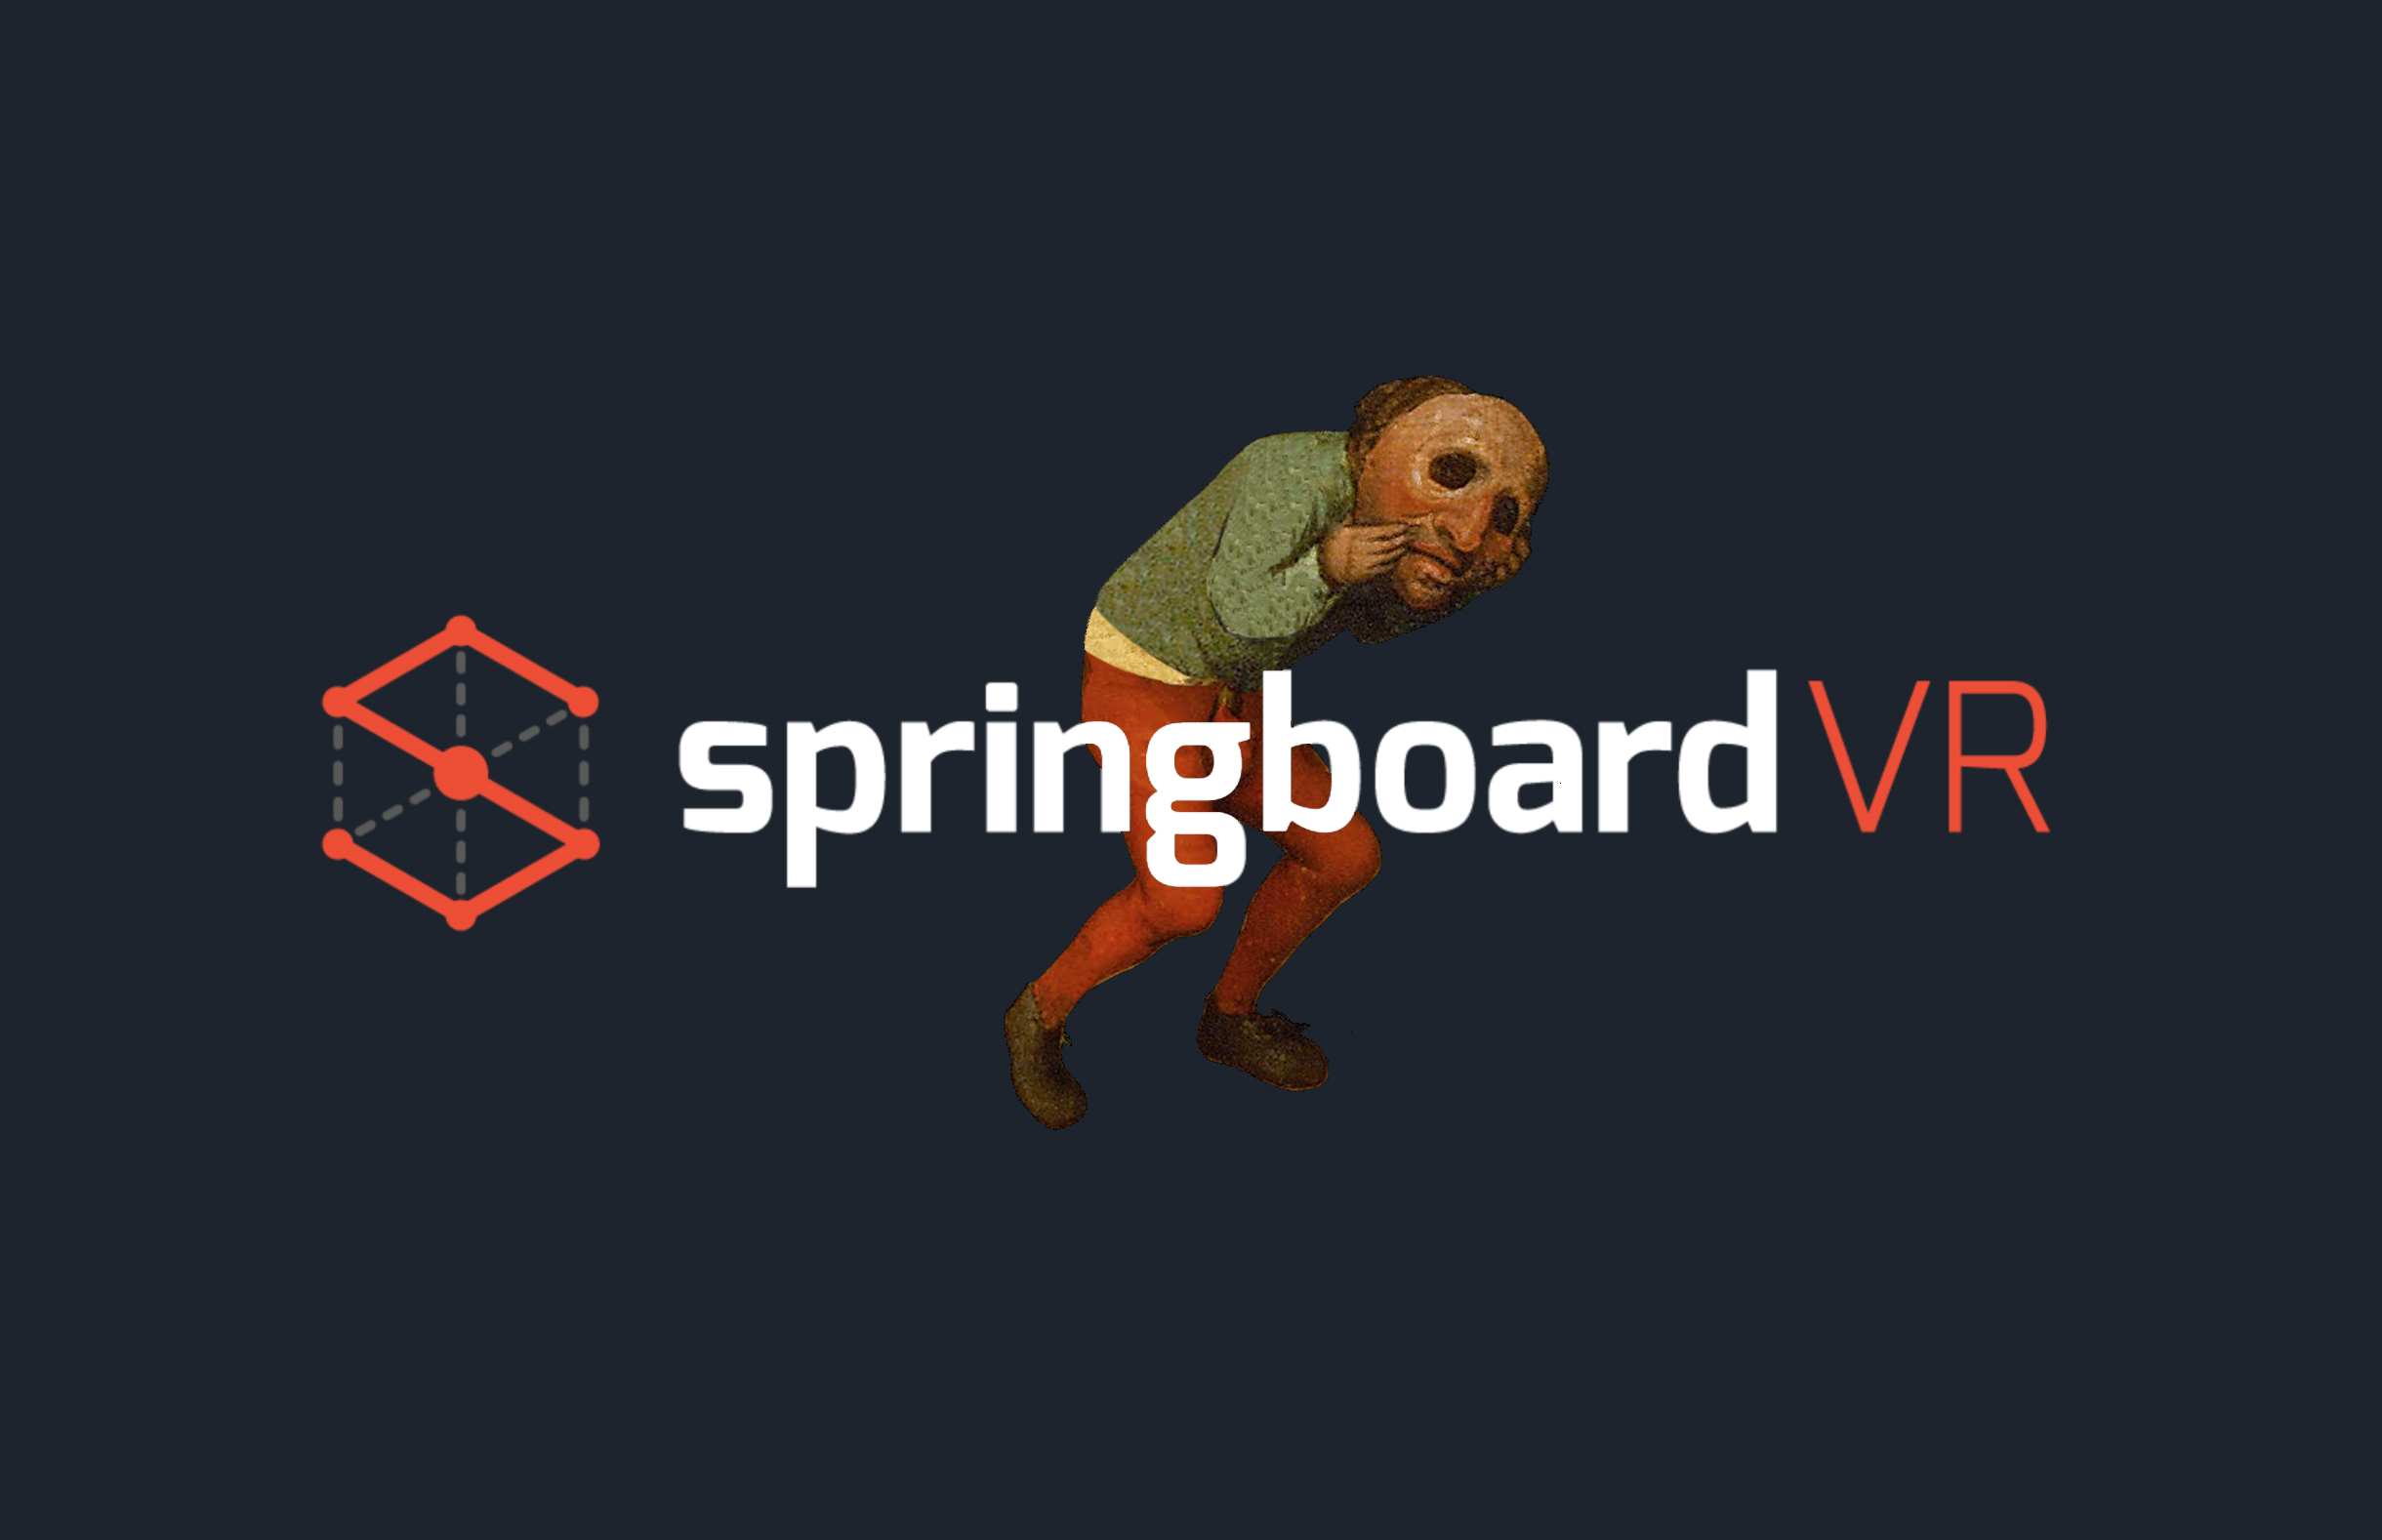 1,2,3…BRUEGEL! is now available on SPRINGBOARD